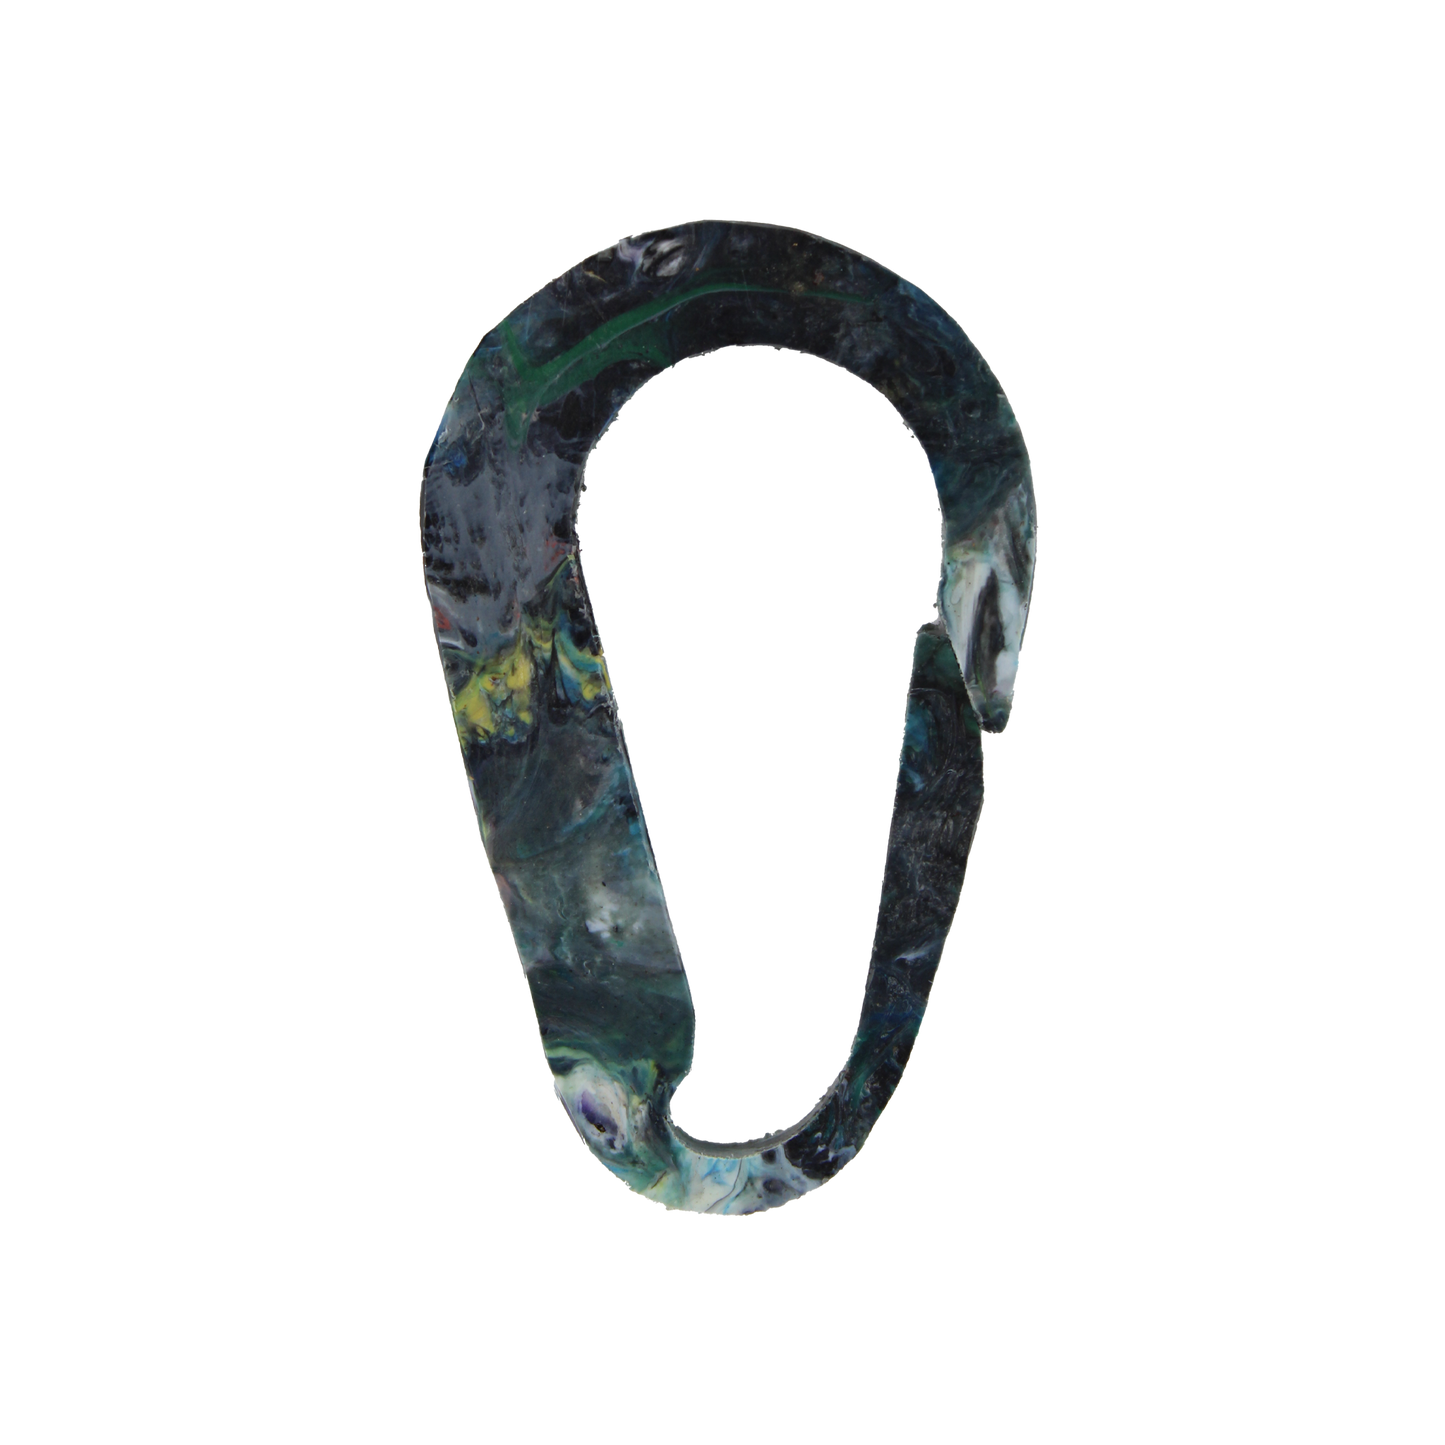 Recycled Plastic Carabiner